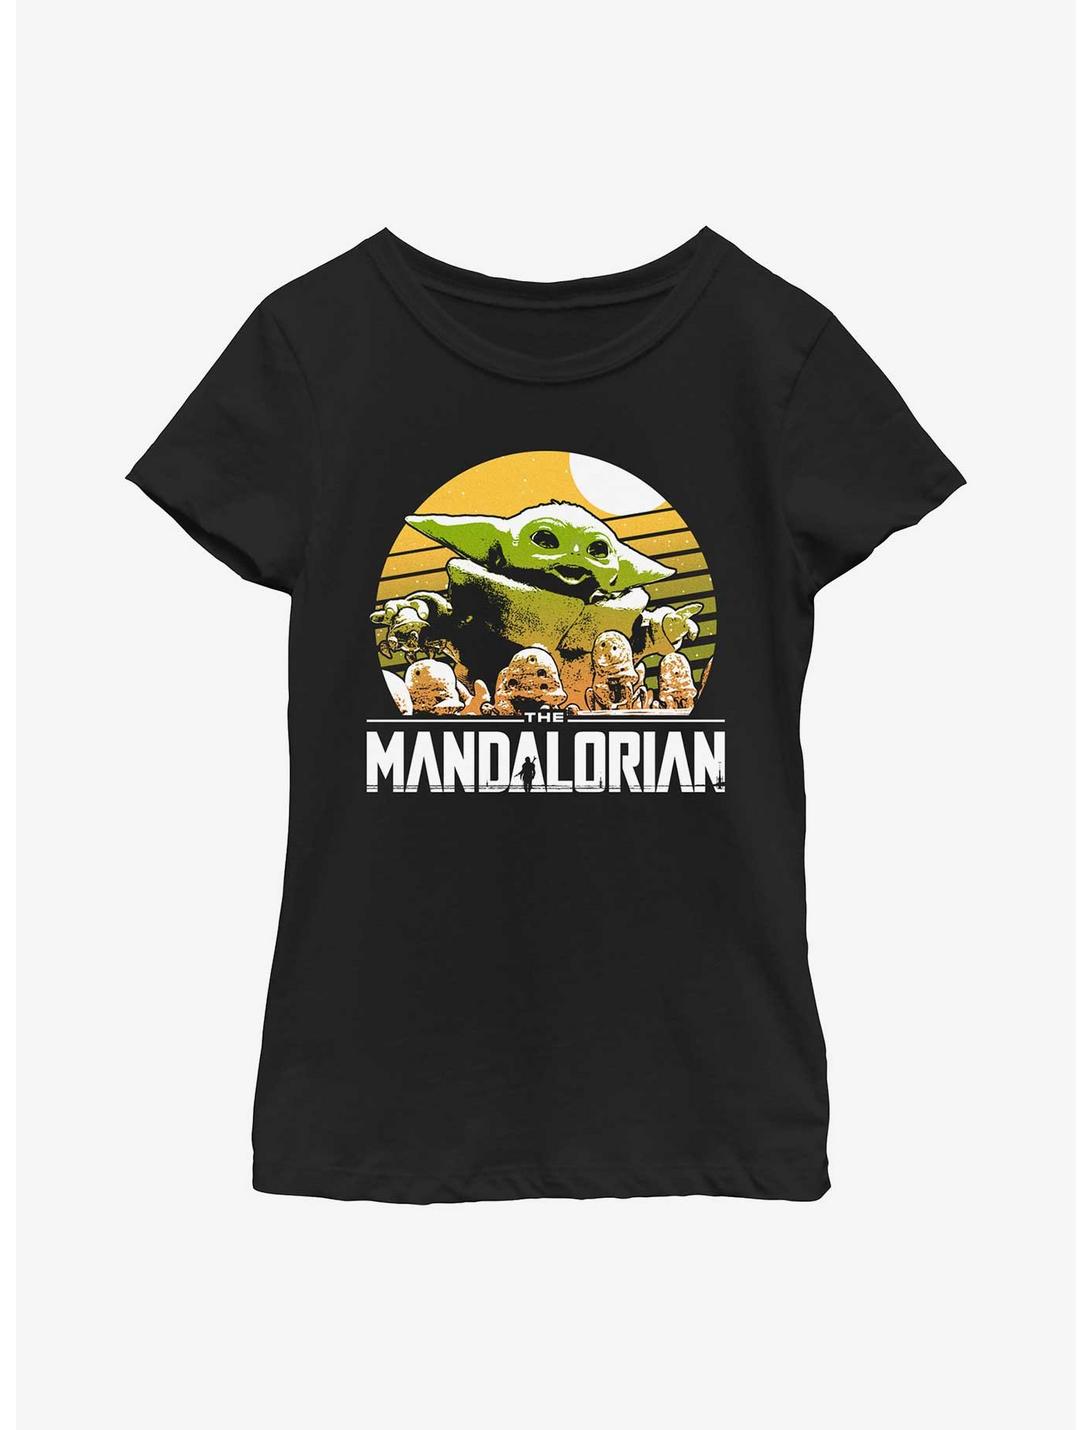 Star Wars The Mandalorian Grogu Playing With Stone Crabs Youth Girls T-Shirt, BLACK, hi-res